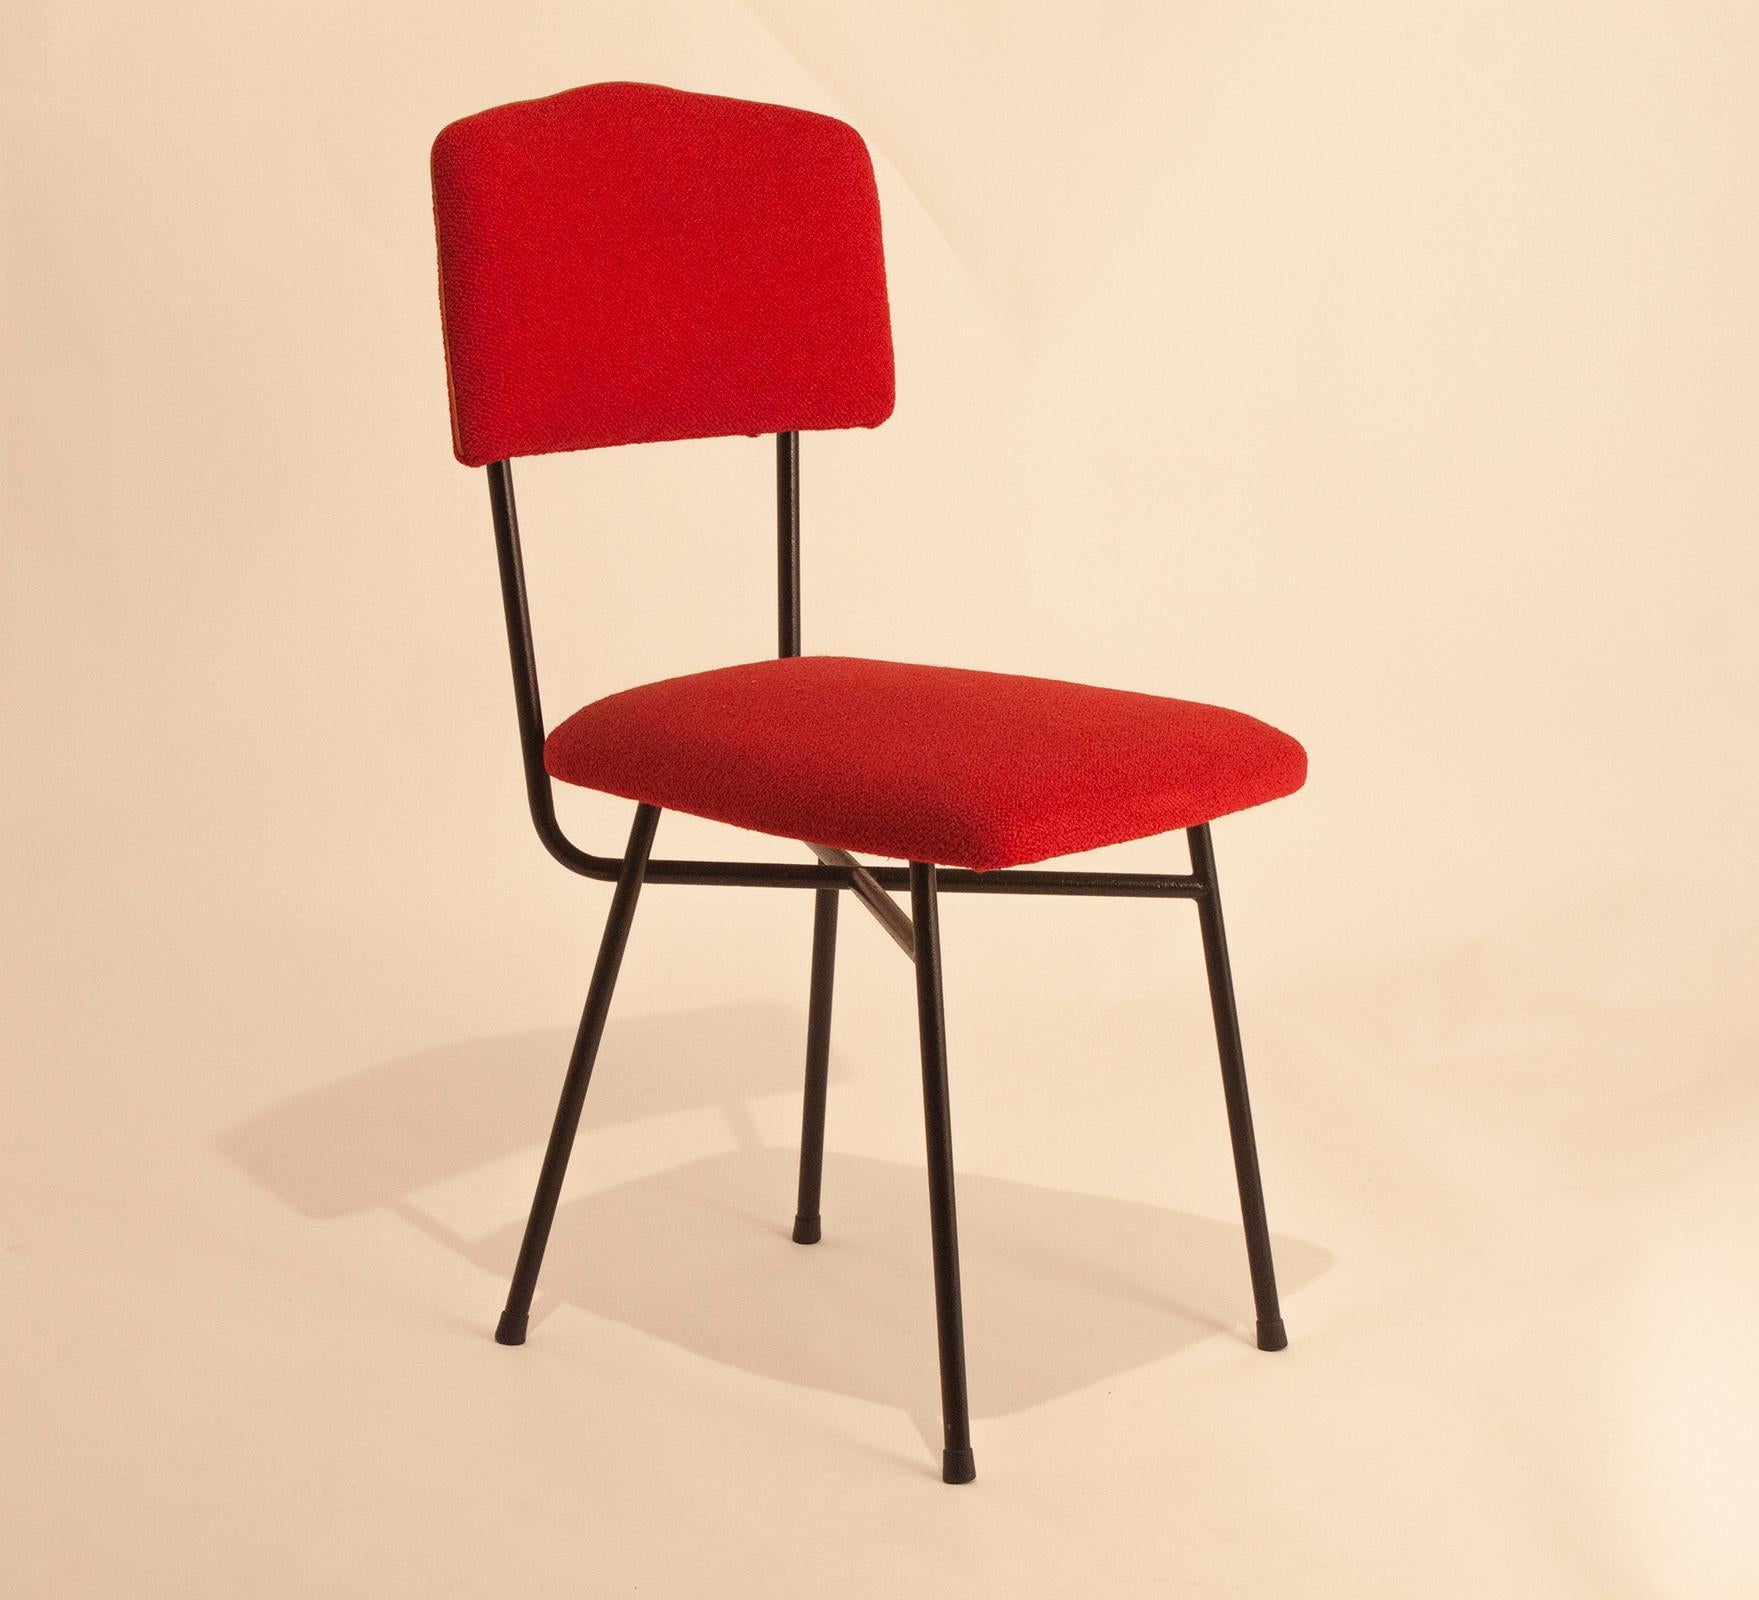 Textile Set of Four Italian Chairs, Italy, 1950s, Iron and Red Fabric